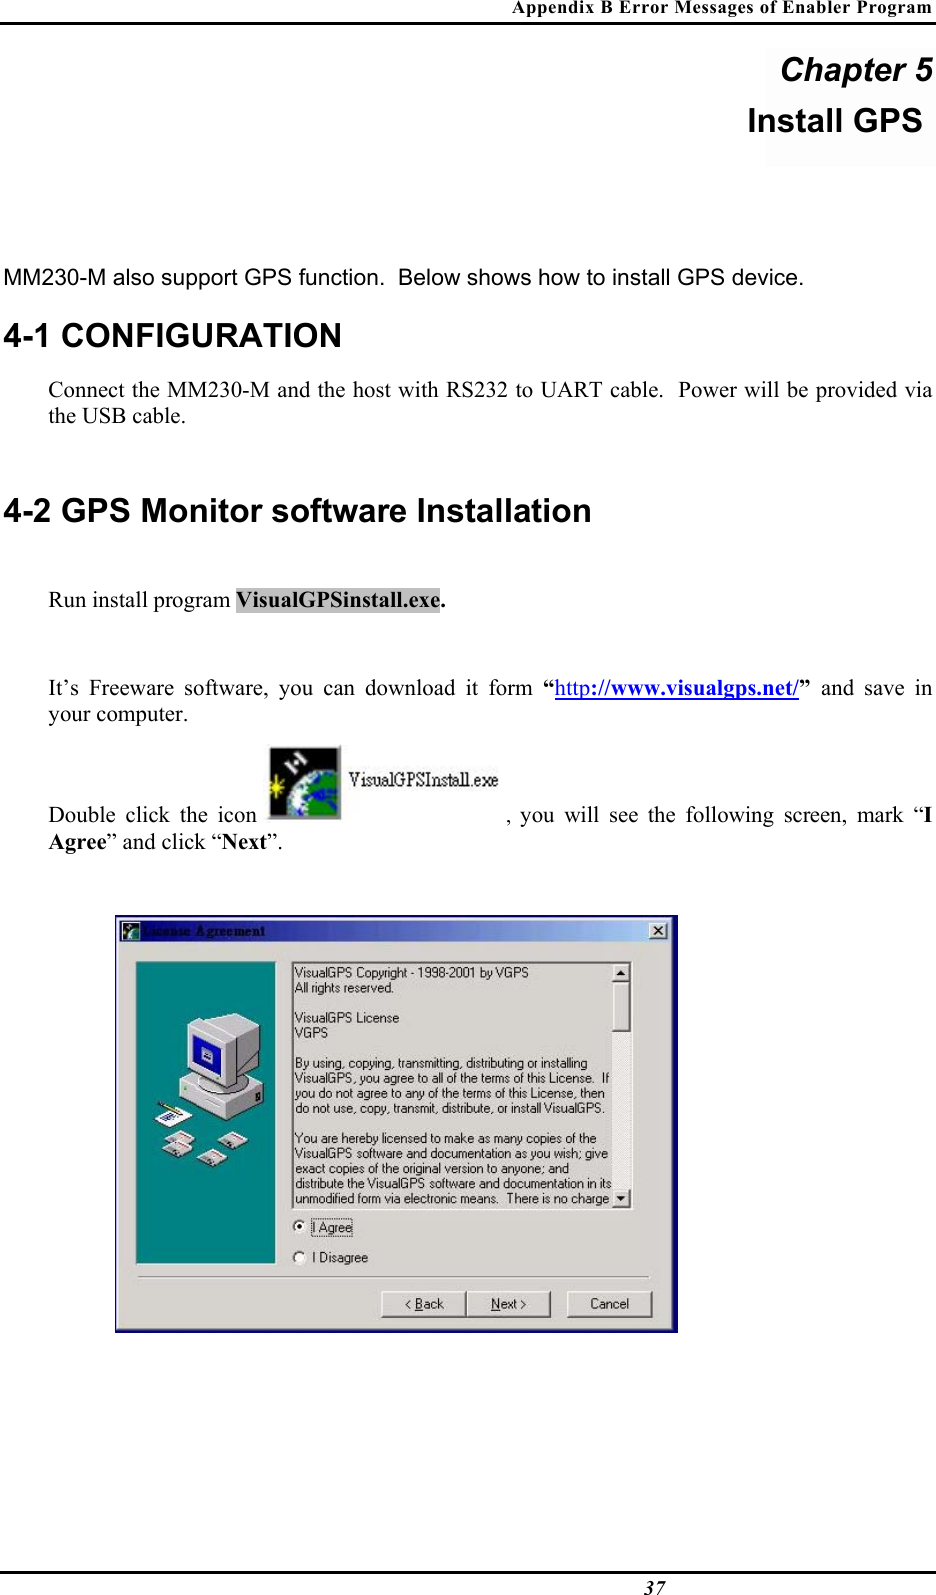 Appendix B Error Messages of Enabler Program  37 Chapter 5 Install GPS  MM230-M also support GPS function.  Below shows how to install GPS device. 4-1 CONFIGURATION Connect the MM230-M and the host with RS232 to UART cable.  Power will be provided via the USB cable.  4-2 GPS Monitor software Installation  Run install program VisualGPSinstall.exe.   It’s Freeware software, you can download it form “http://www.visualgps.net/”  and save in your computer.   Double click the icon  ,  you will see the following screen, mark “I Agree” and click “Next”.      